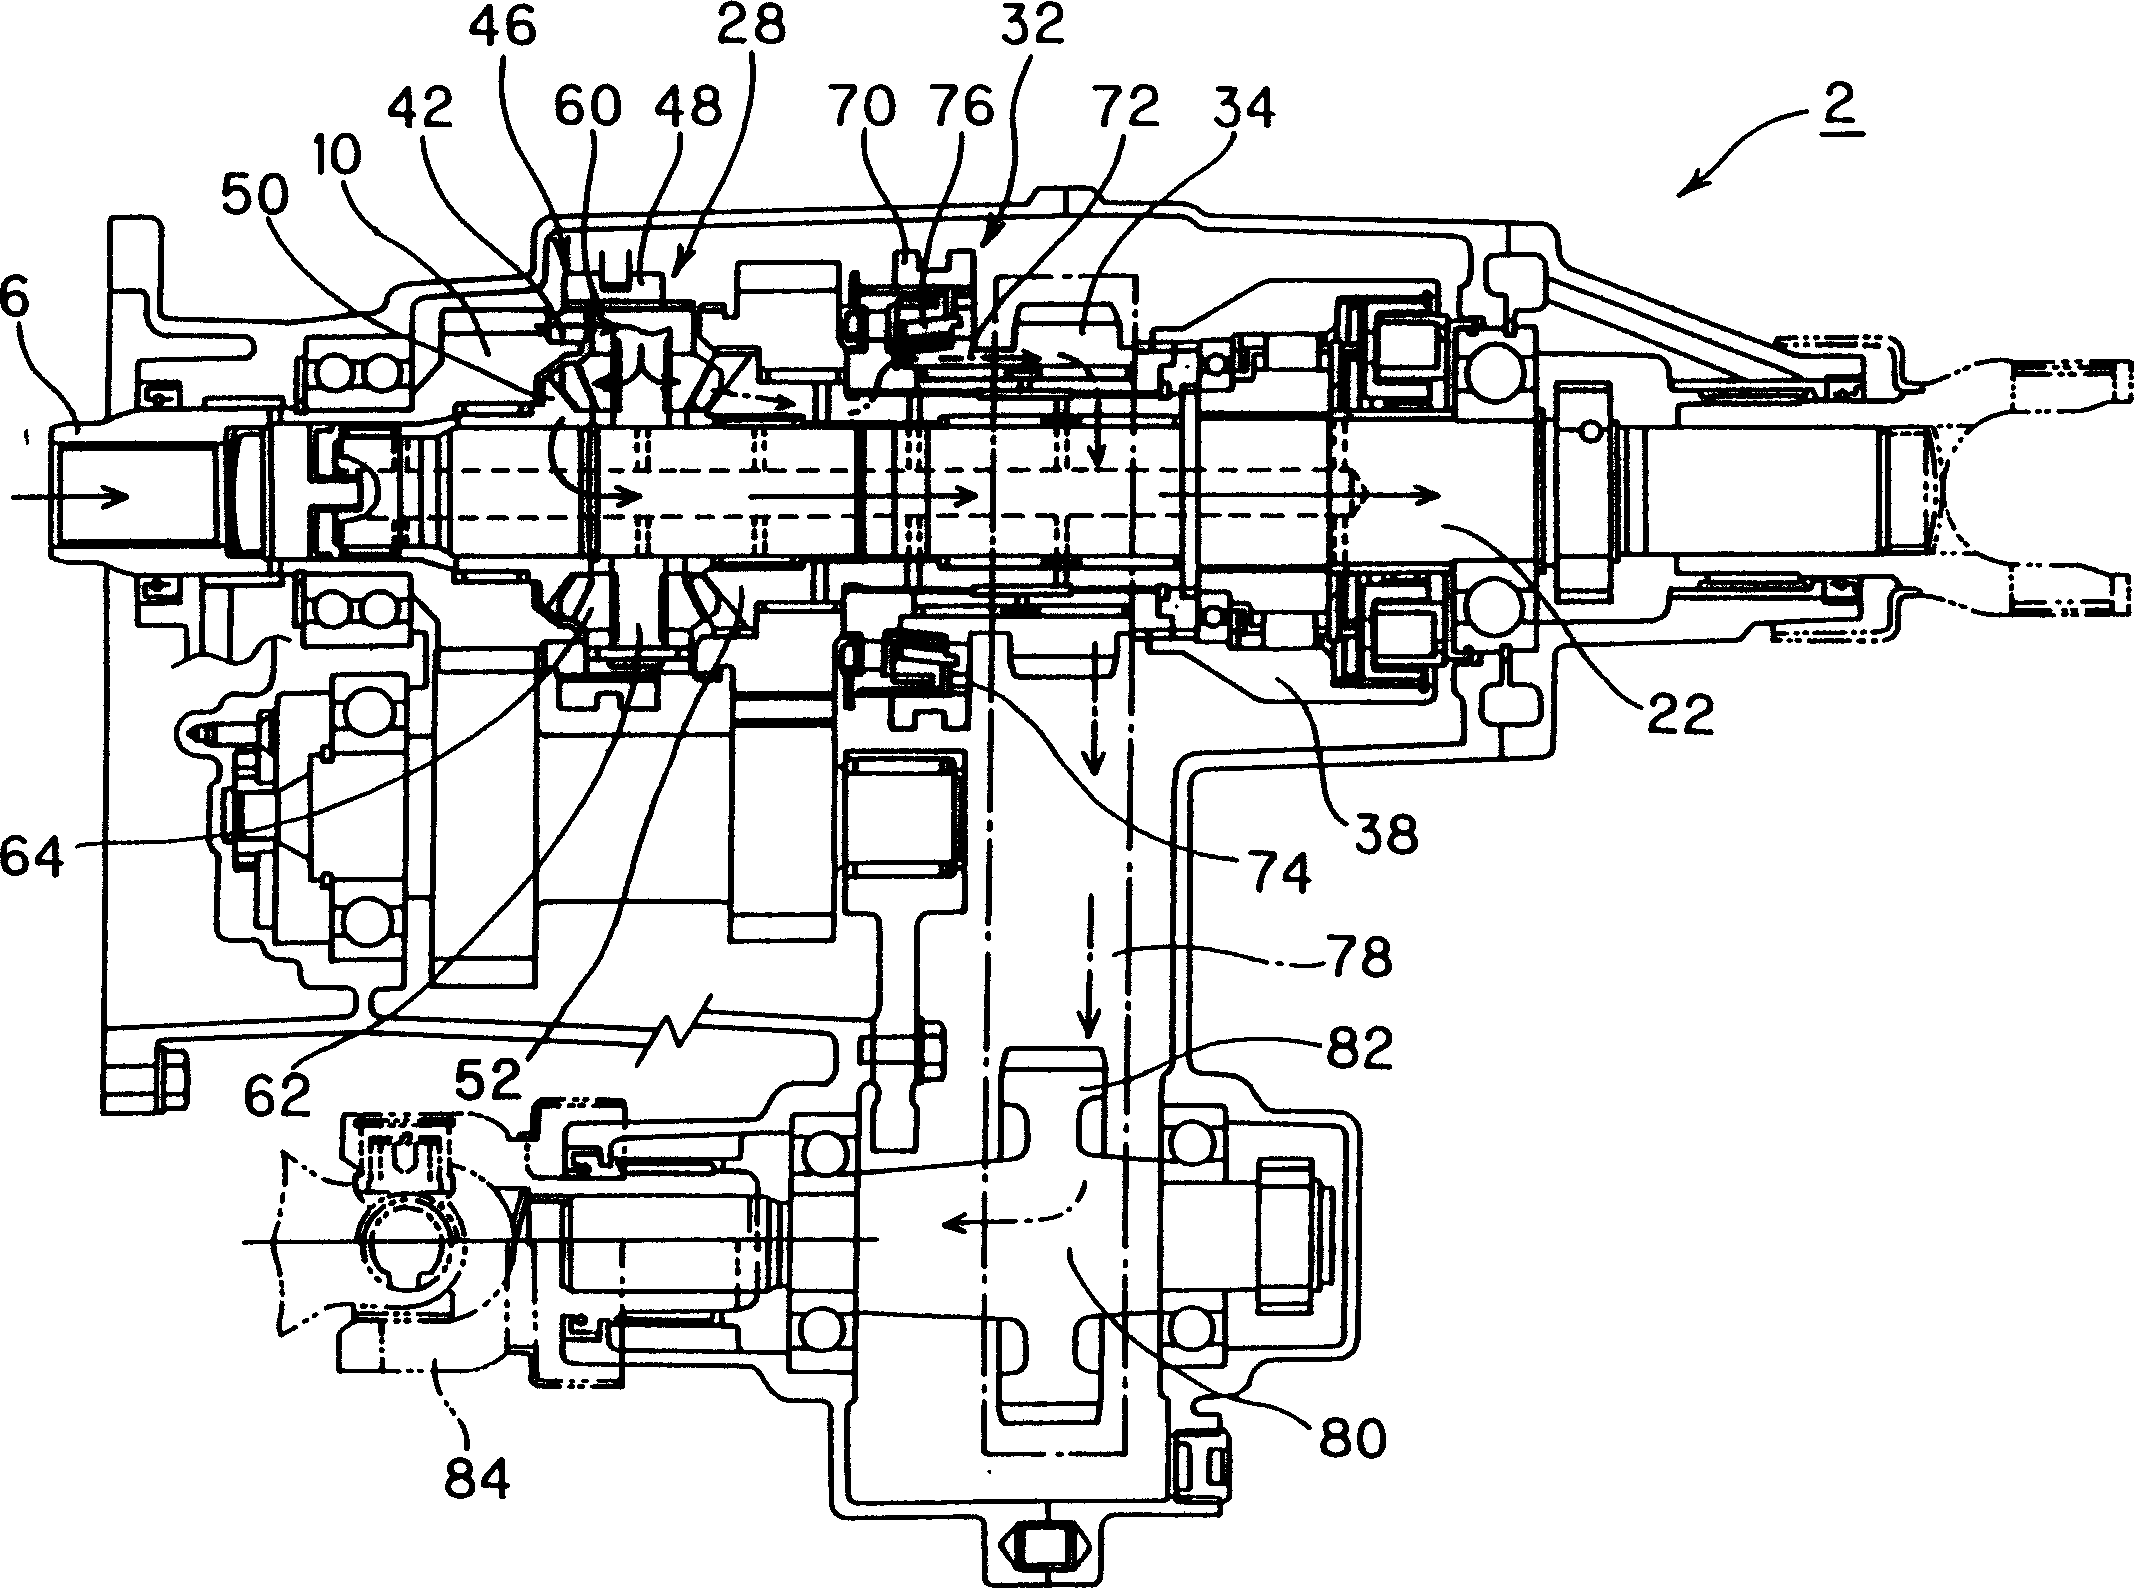 Transfer device for four-wheel driven vehicle